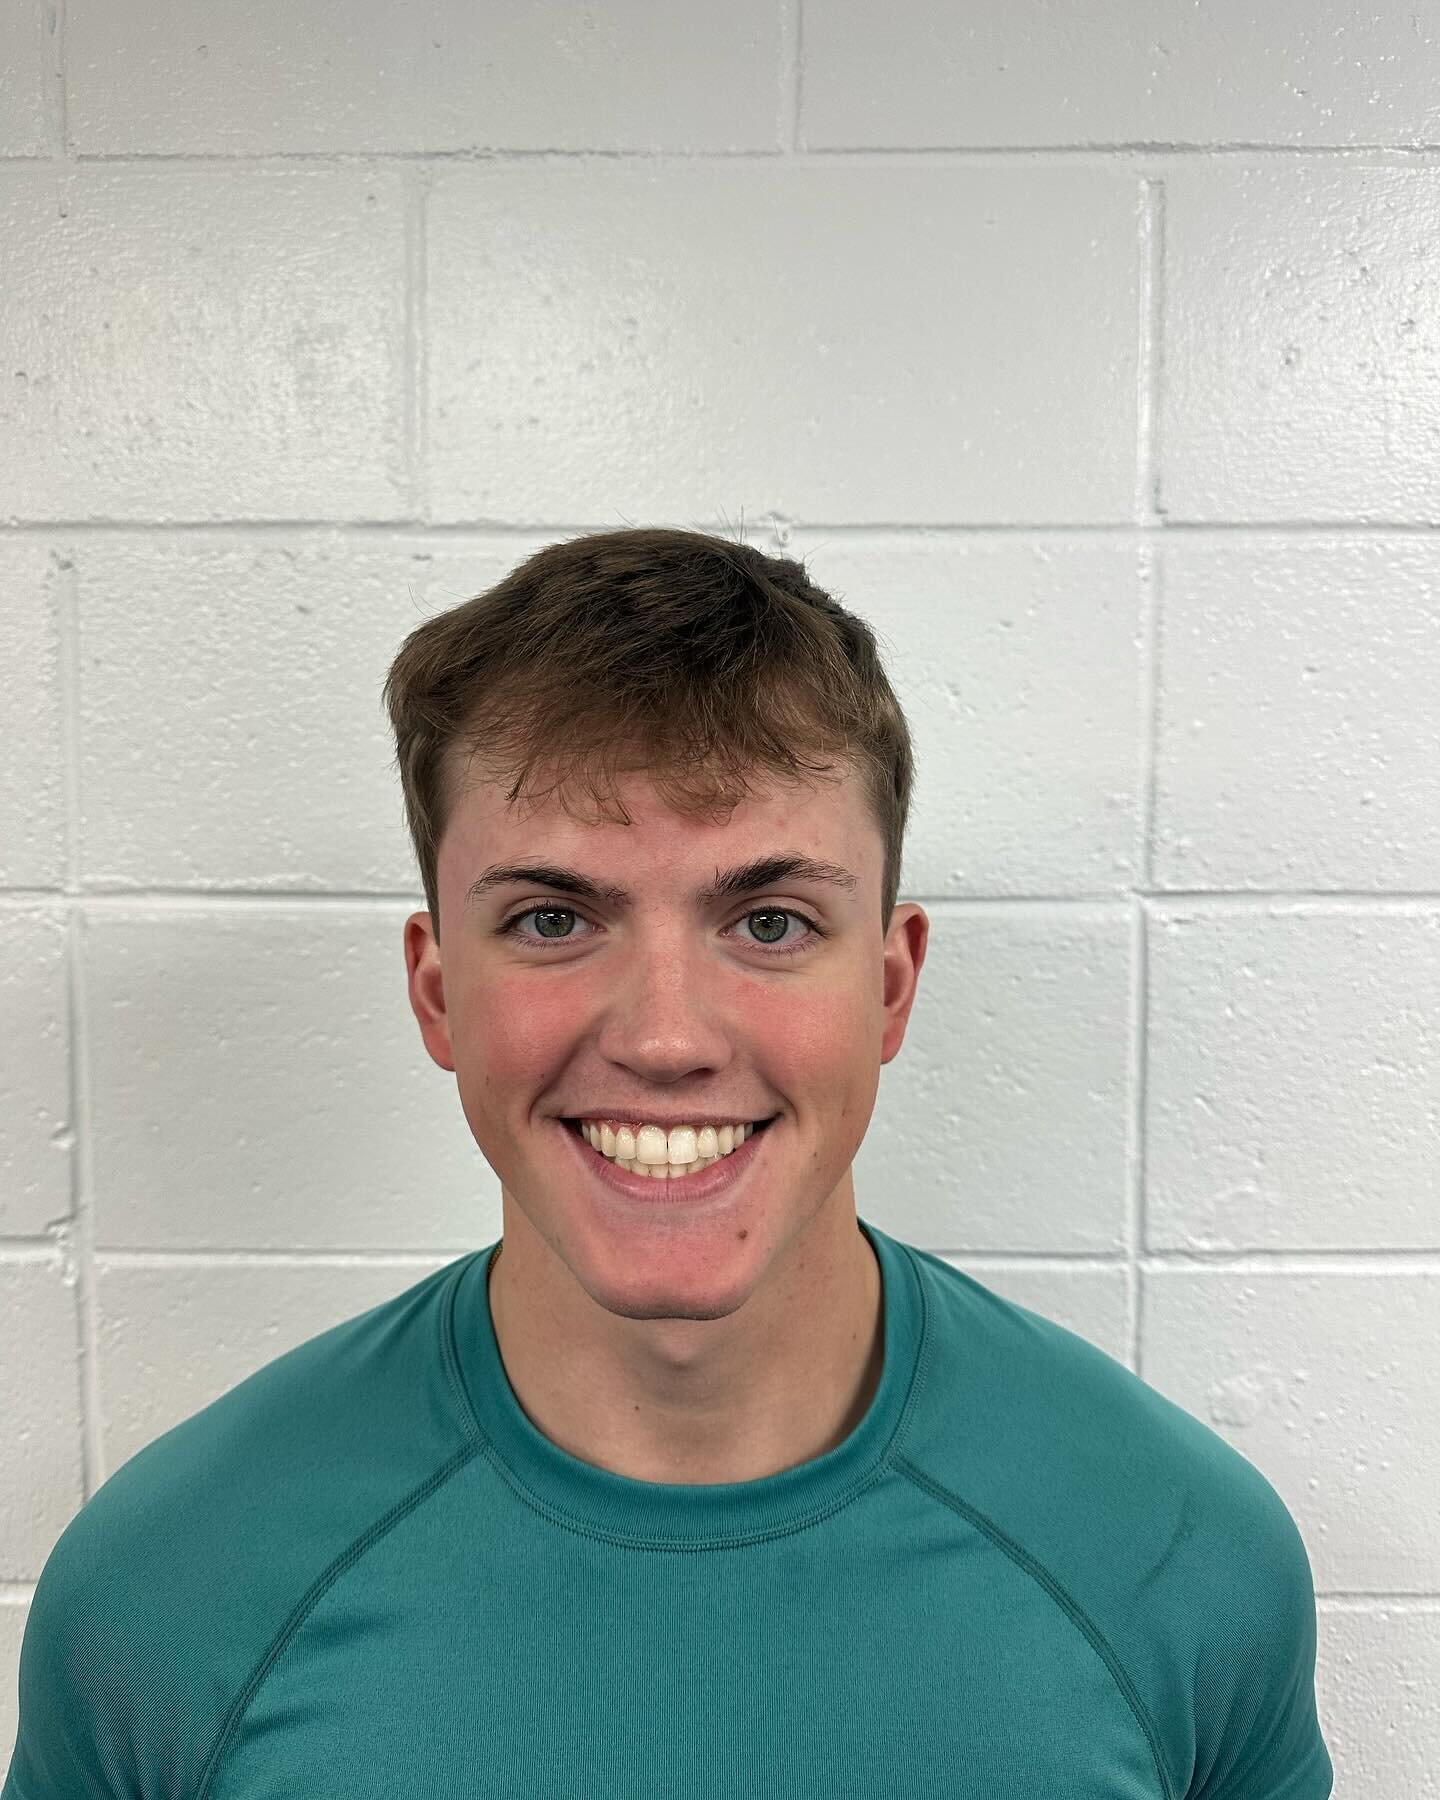 Please meet one of our personal trainers, Ethan Cover!

Ethan is a current Exercise Science student at IU residing in Bloomington, IN. He is a Certified Personal Trainer with National Academy of Sports Medicine.

Education:
A.S Science
Current Junior